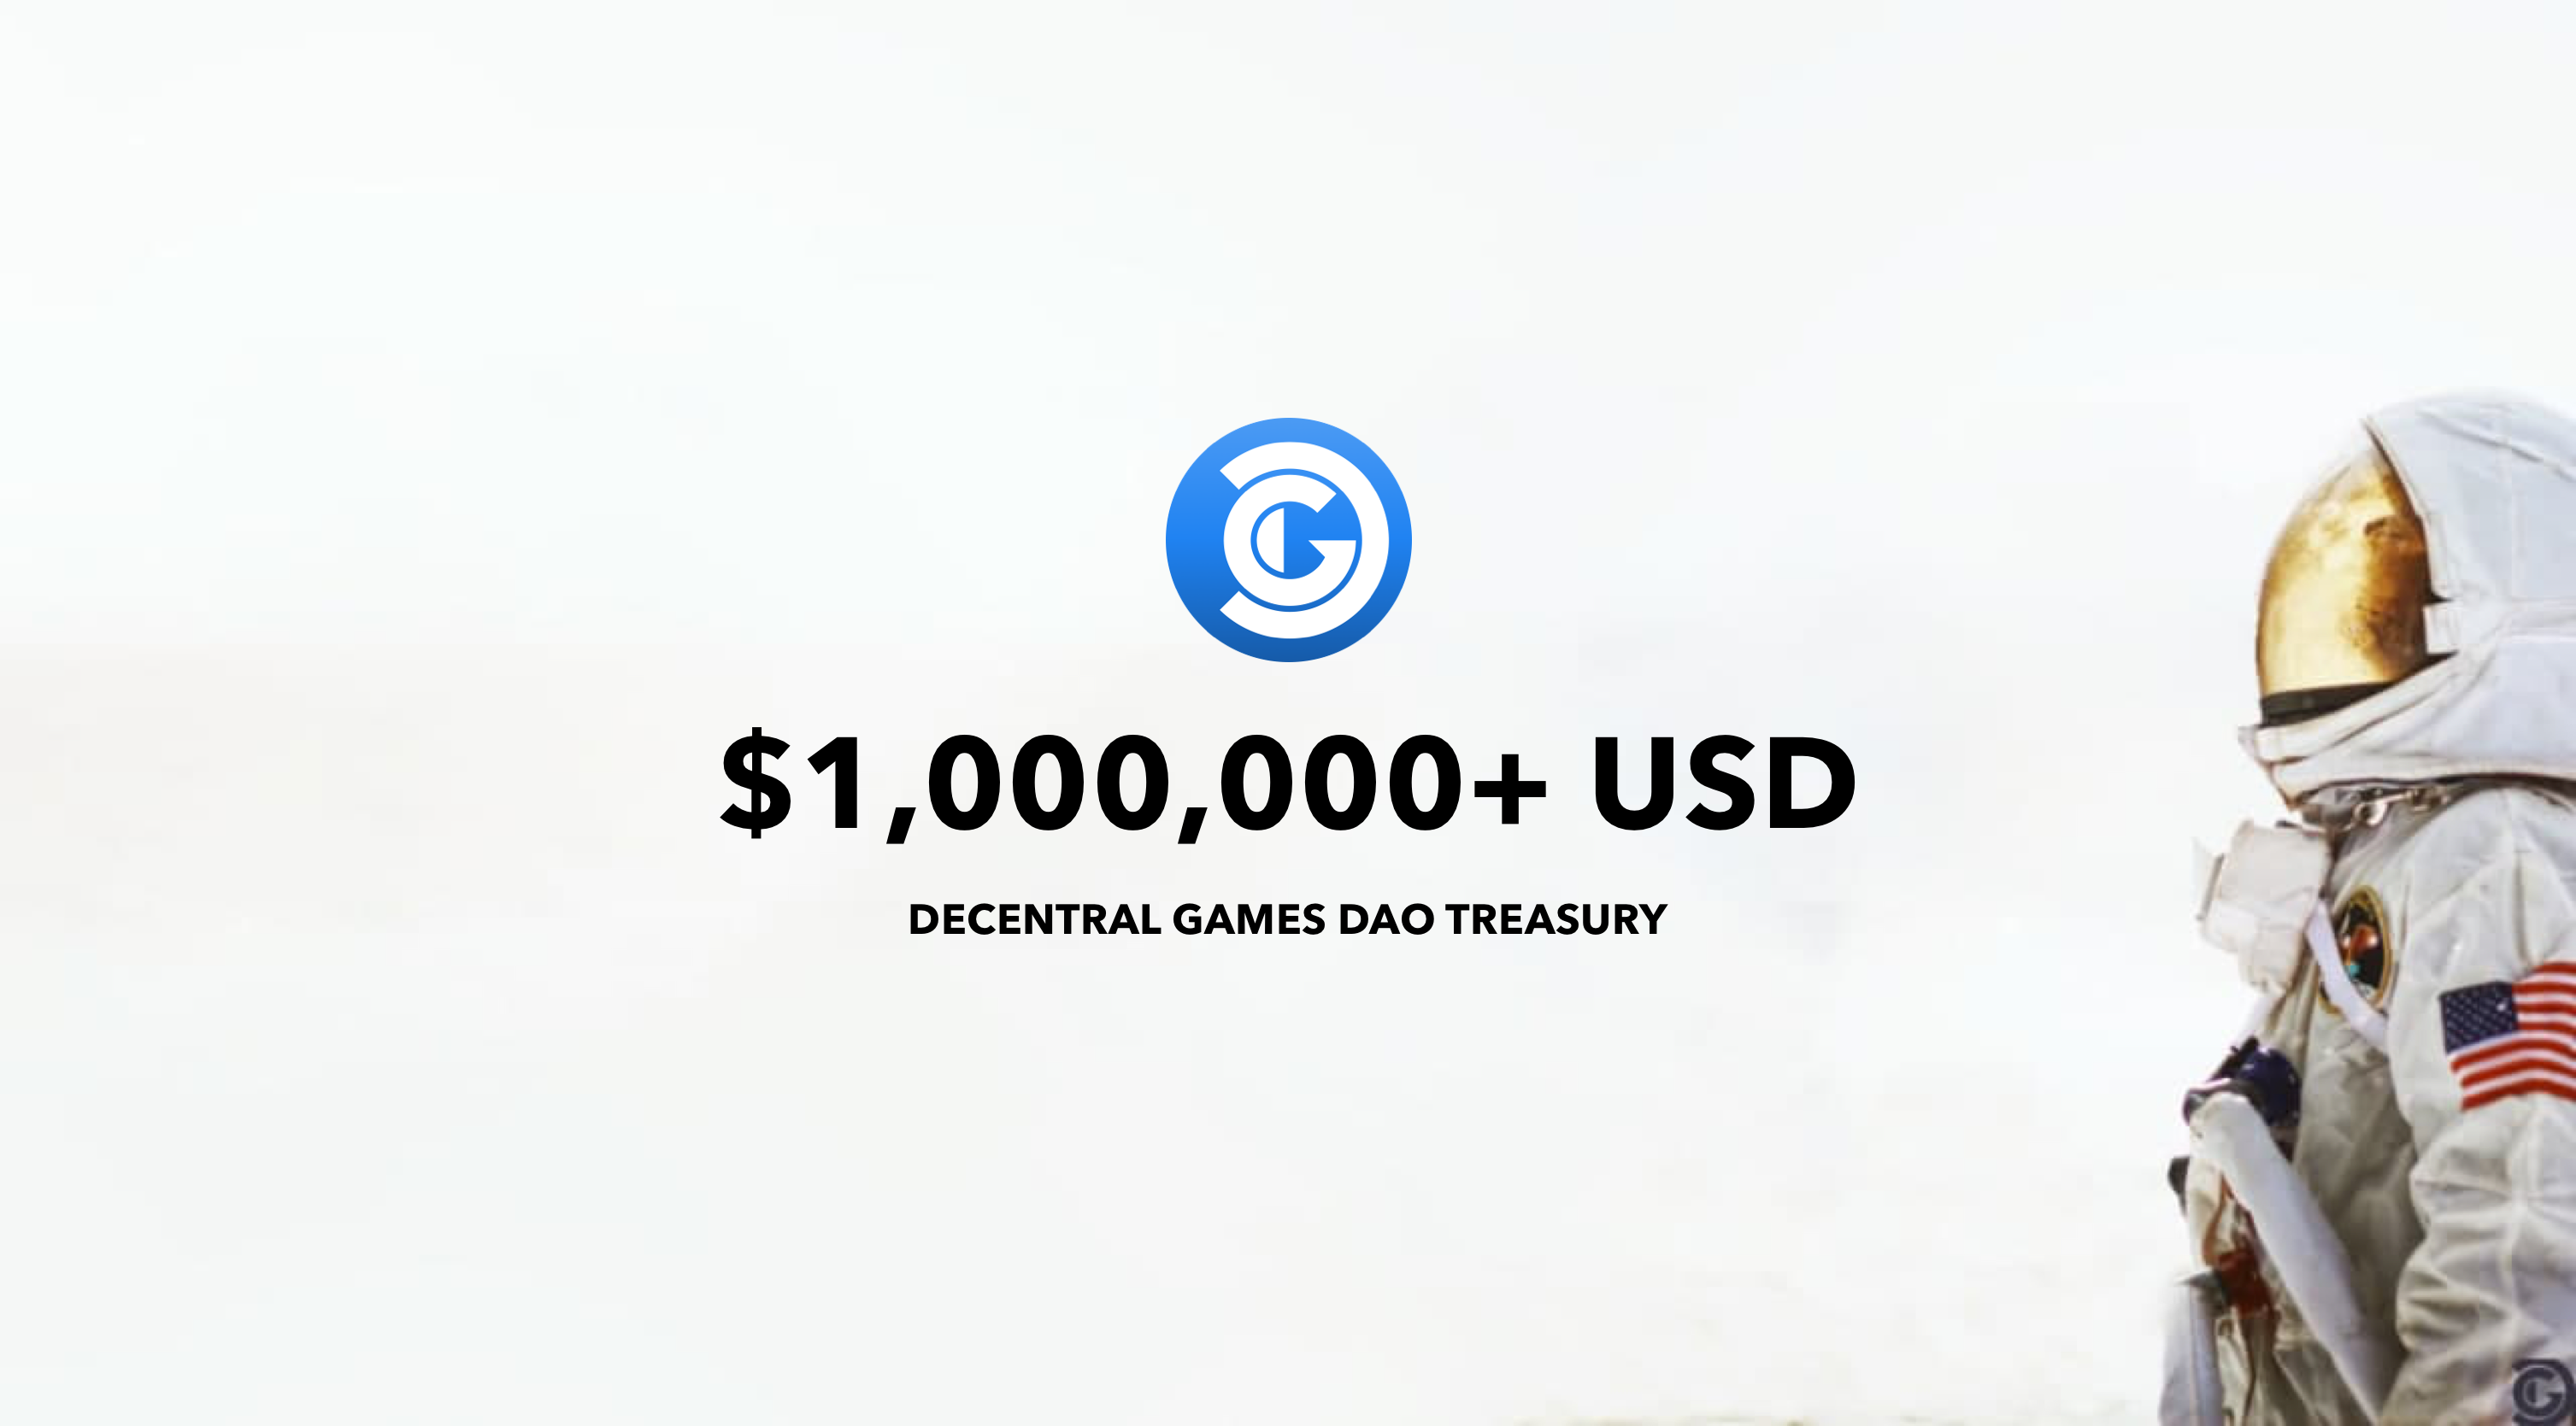 Decentral Games makes a monumental announcement on its DAO move